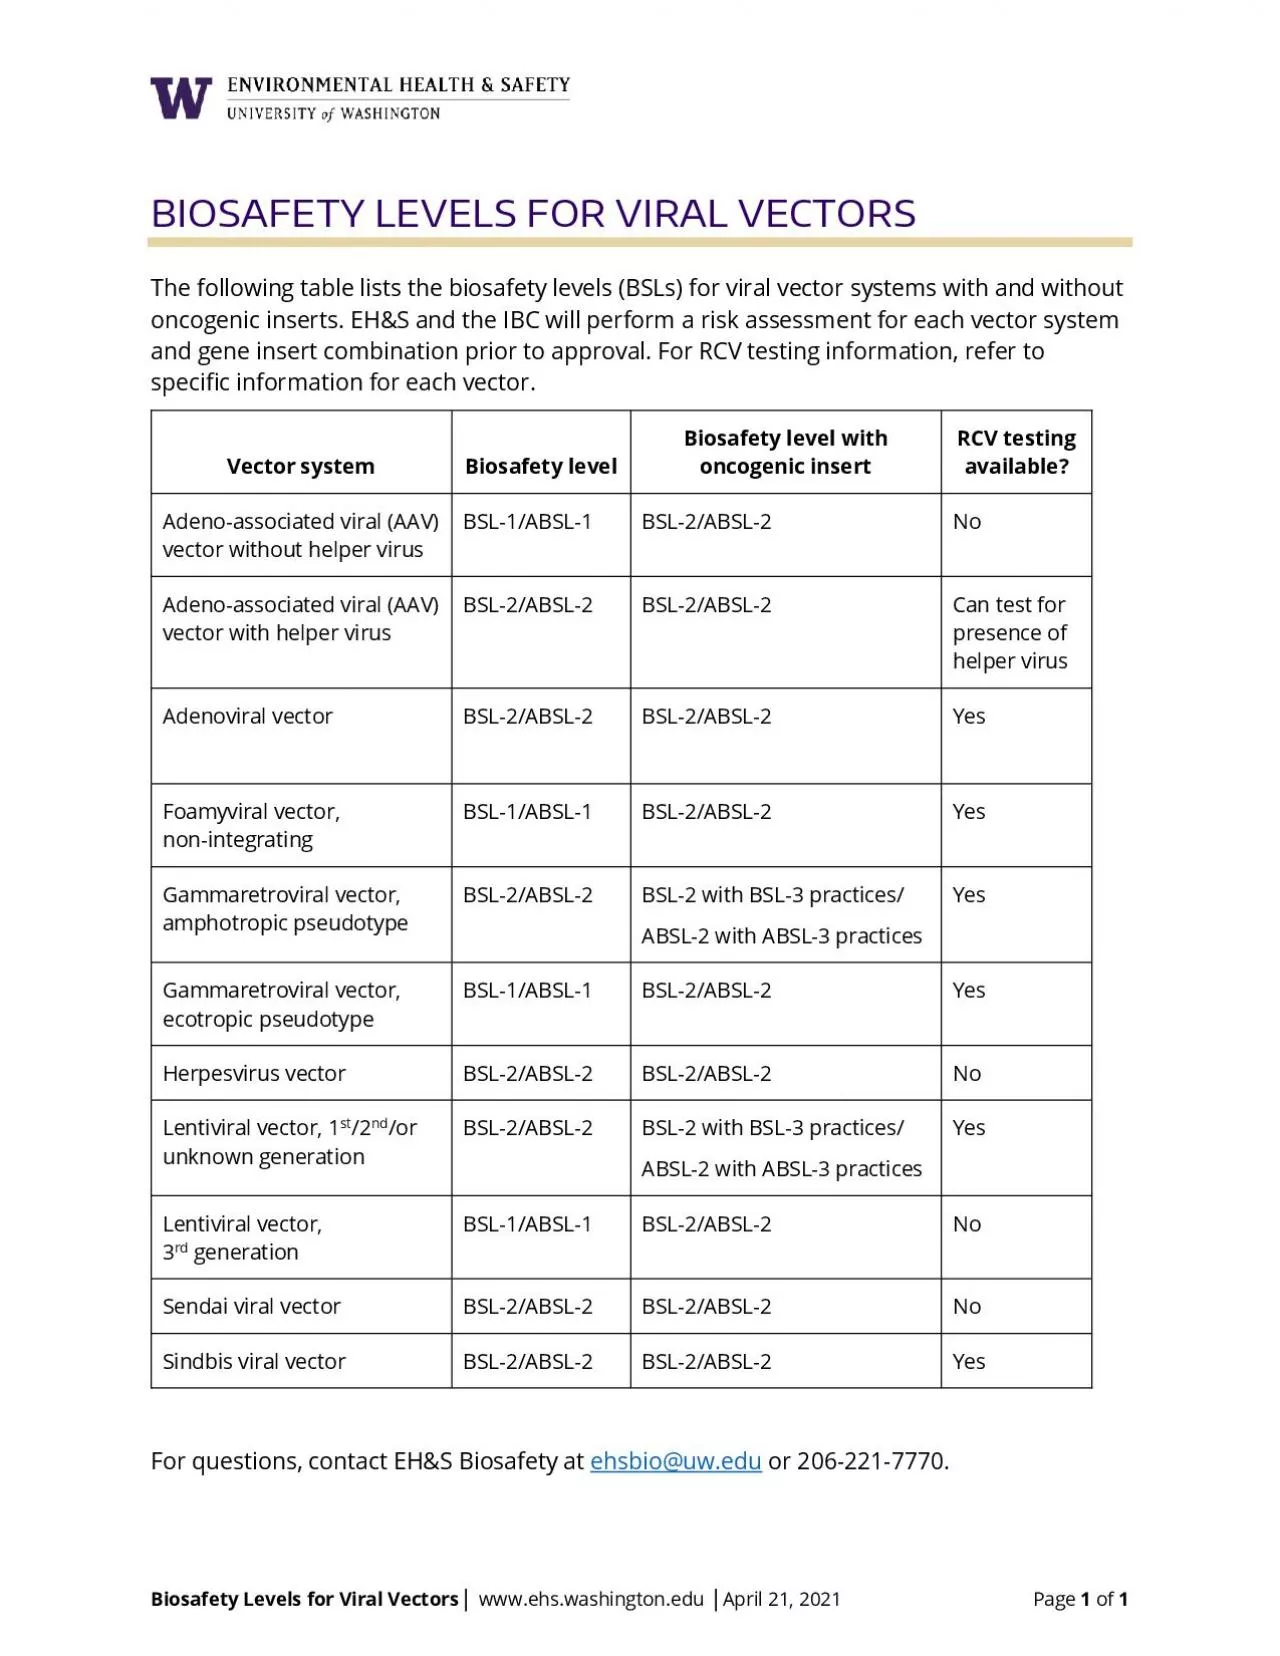 Biosafety Levels for Viral Vectors